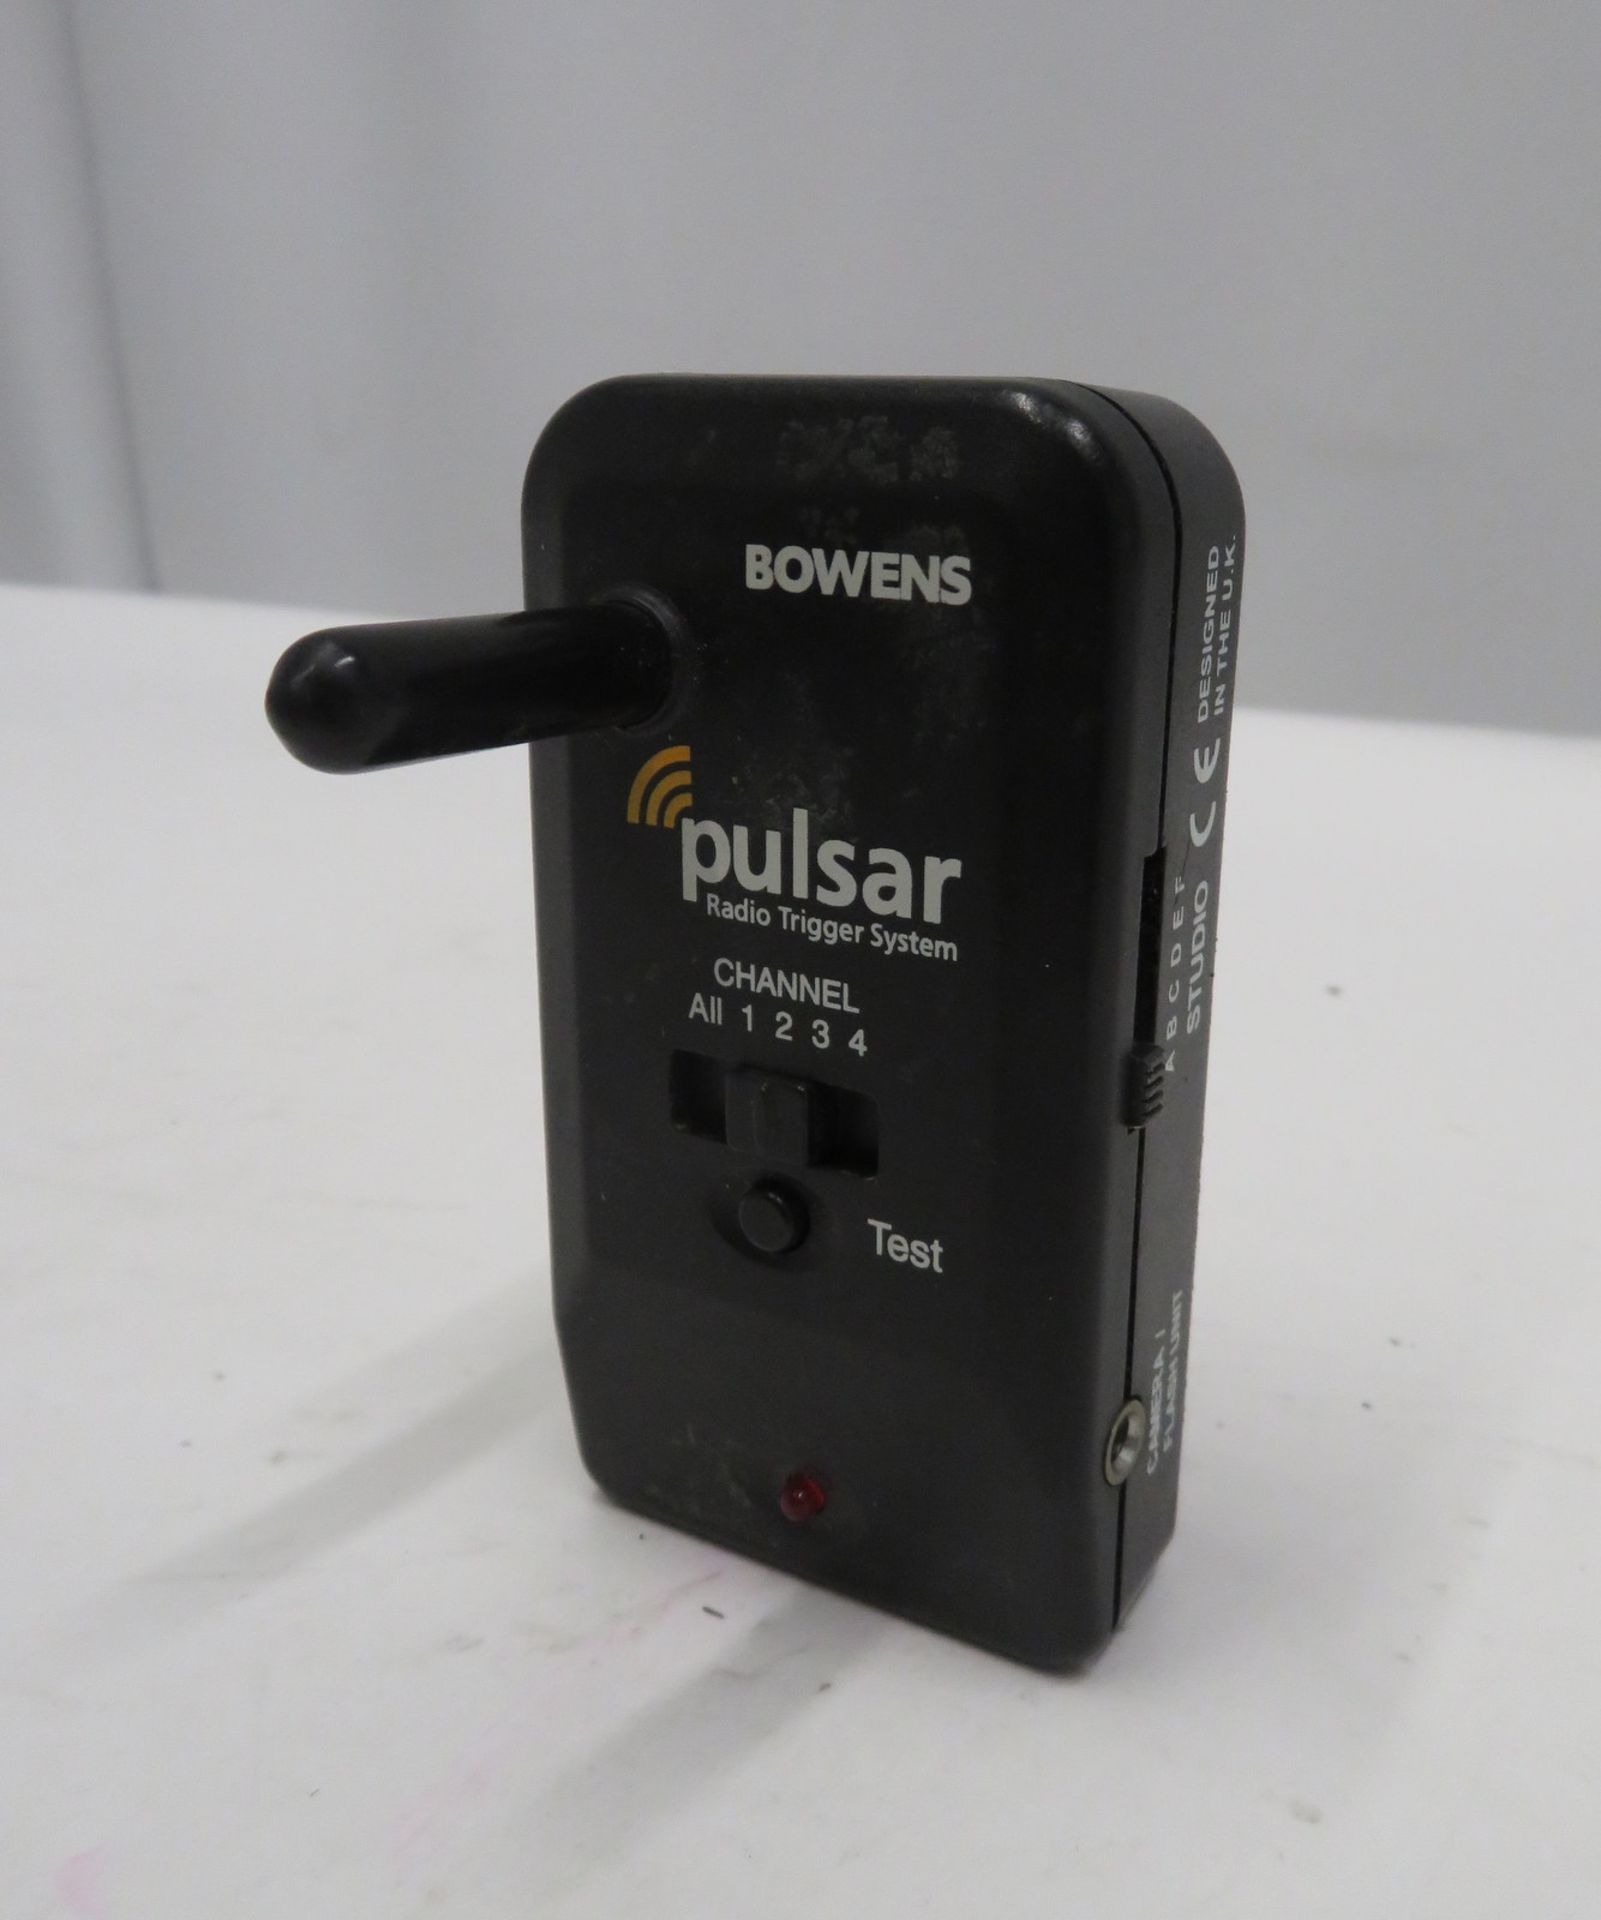 Bowens Pulsar radio trigger system, no battery cover - Image 2 of 3